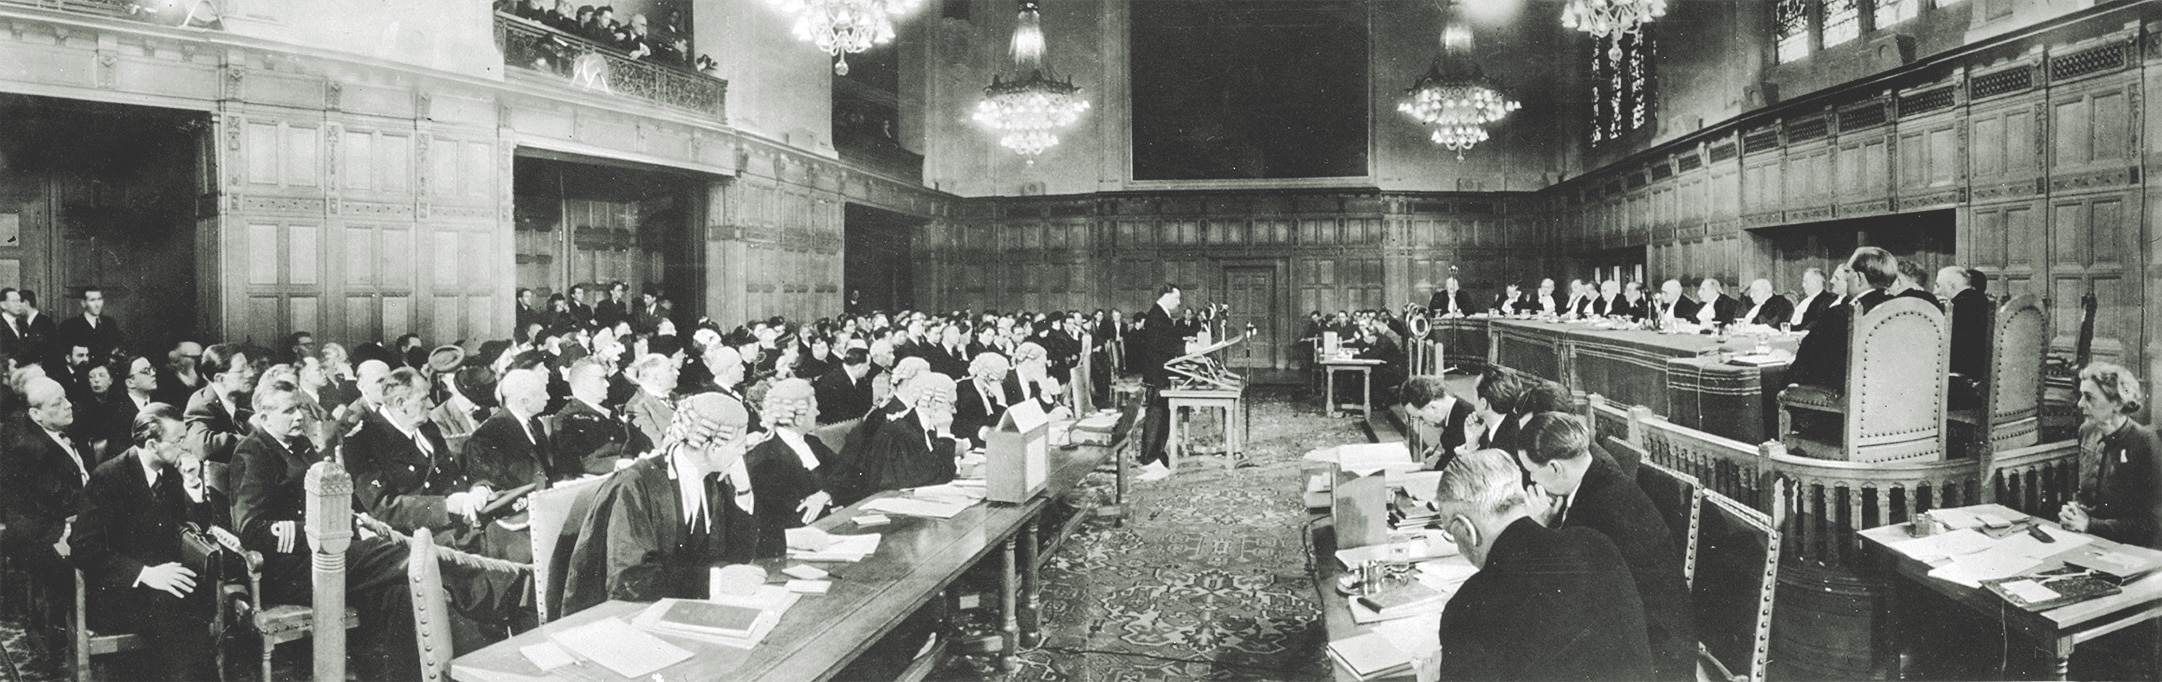 The Court of International Justice in The Hague meets in 1948 to consider Britain’s dispute with Albania over the Corfu incident. (Kurt Hulton/Getty Images)